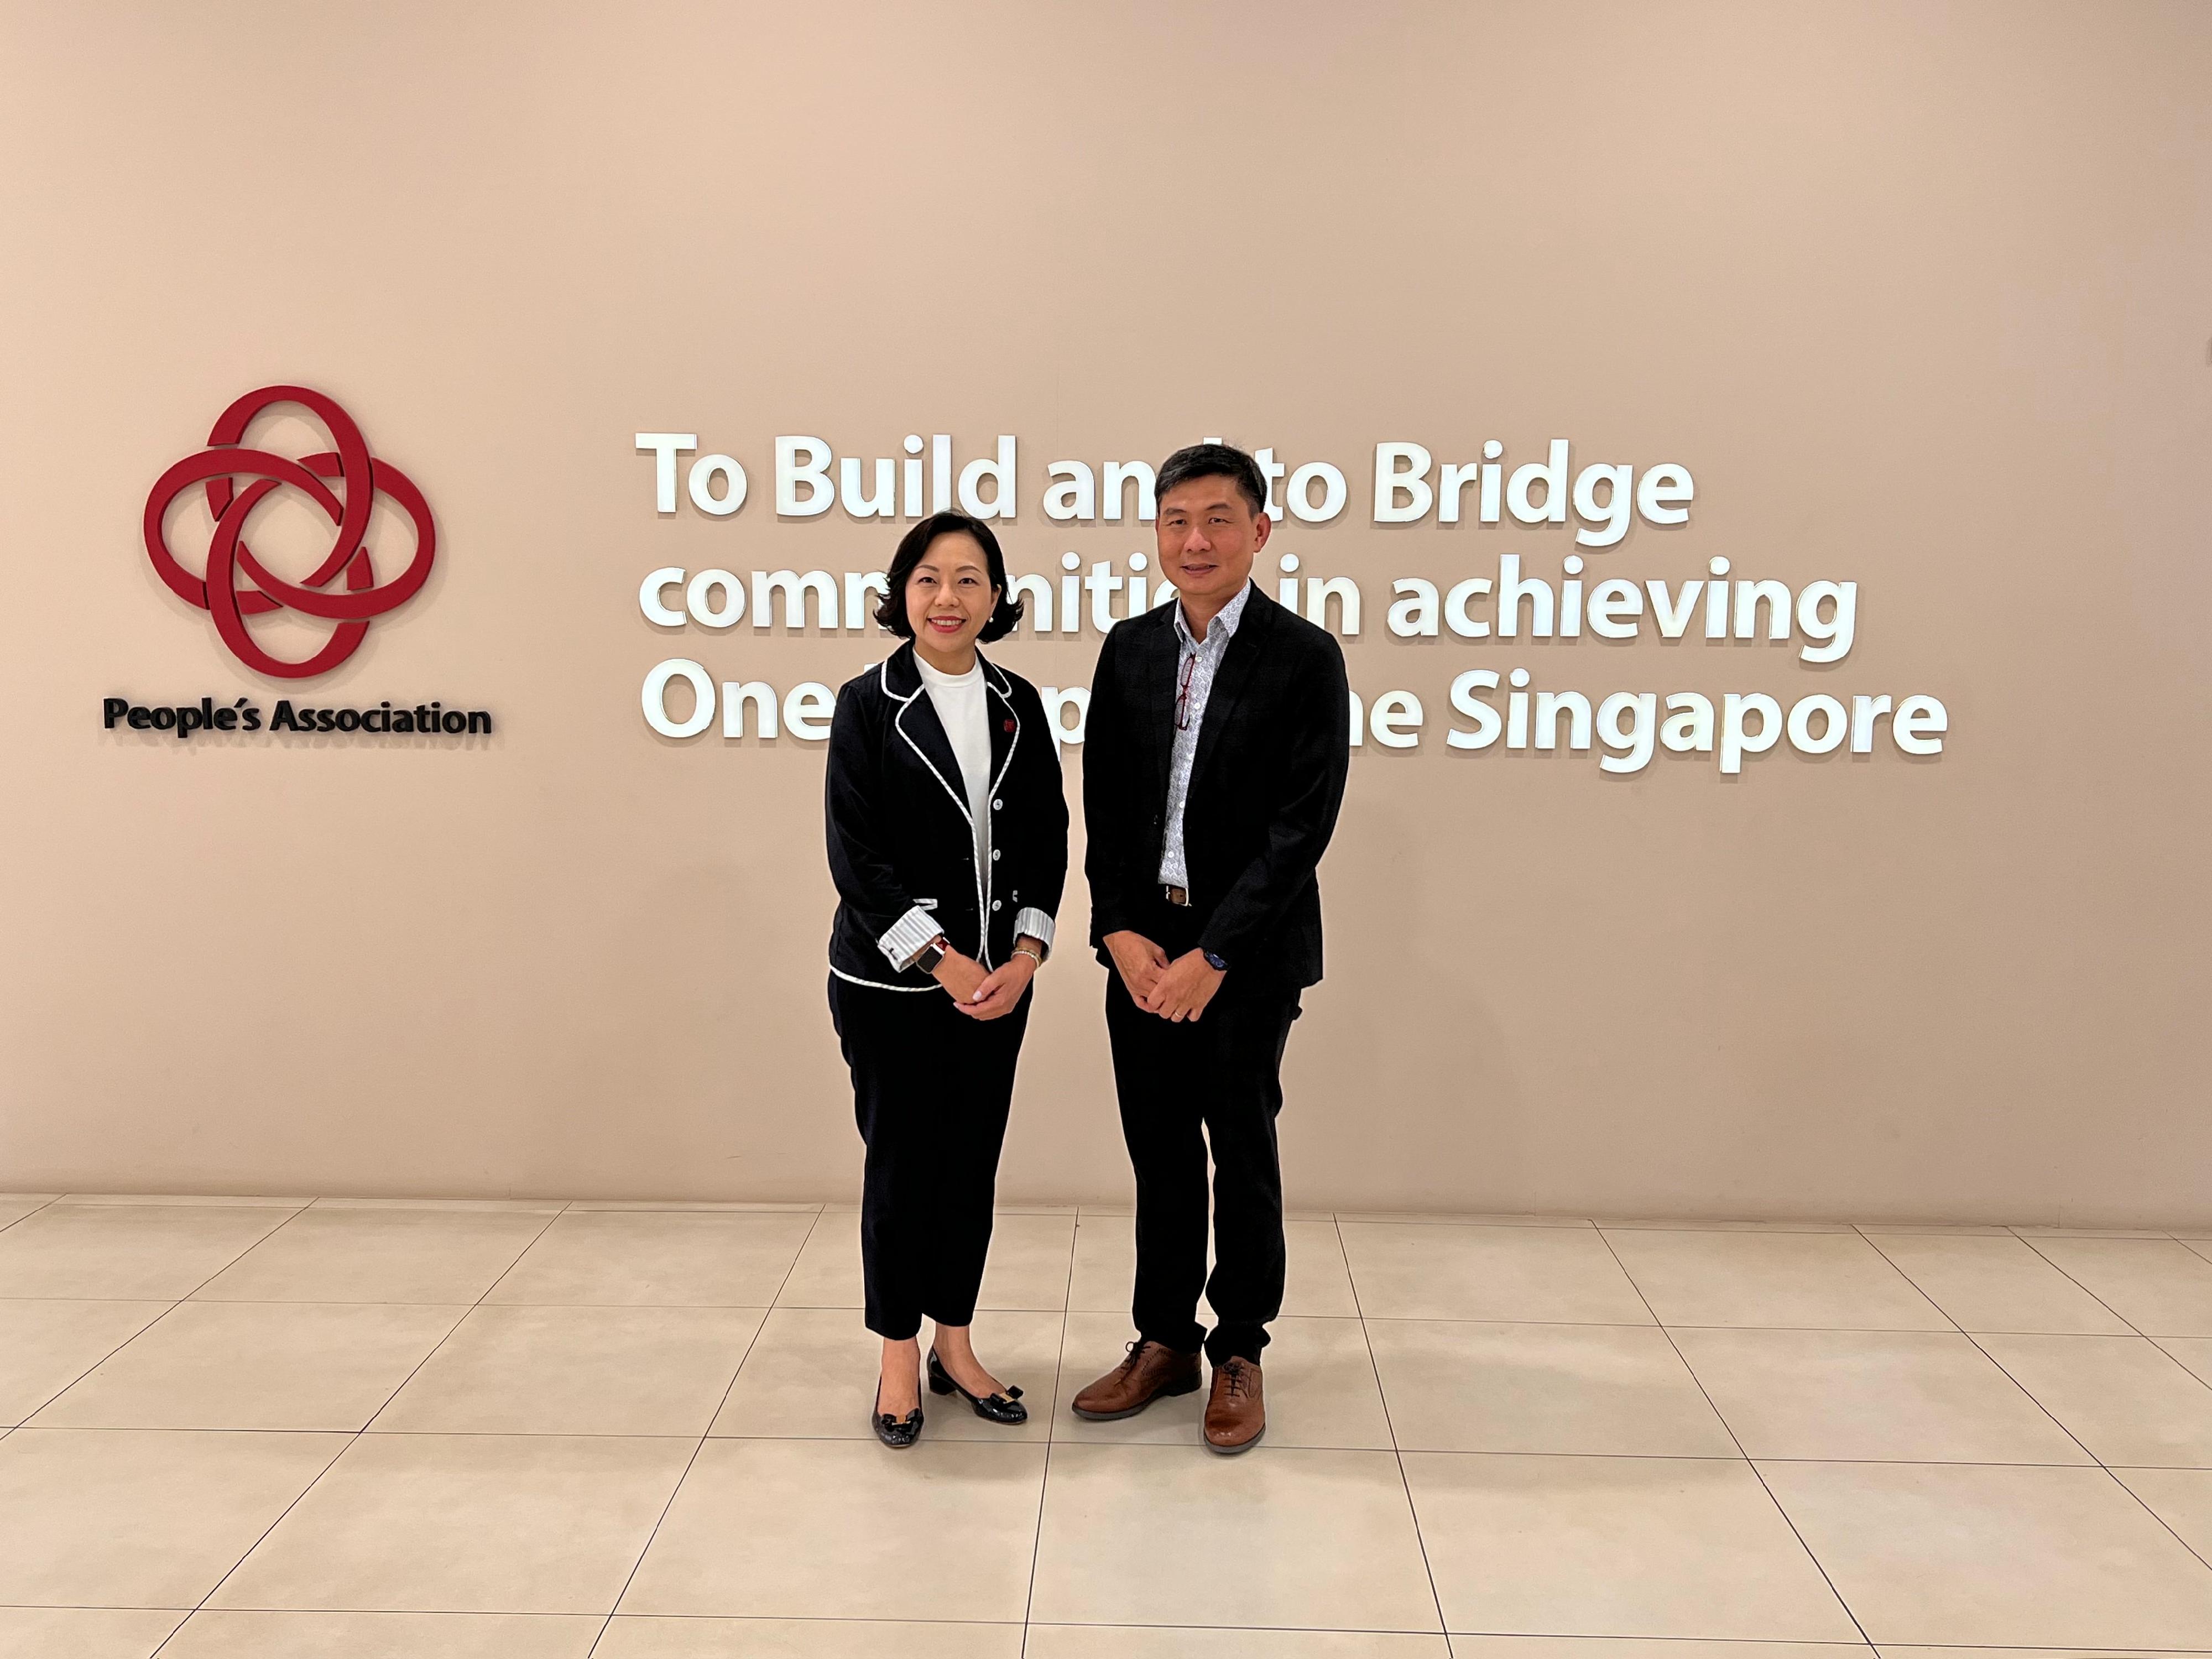 The Secretary for Home and Youth Affairs, Miss Alice Mak,  today (February 16) visited the People's Association in Singapore and met with the Chief Executive Director of the People’s Association, Mr Jimmy Toh. Photo shows Miss Mak (left) and Mr Toh at the People's Association.